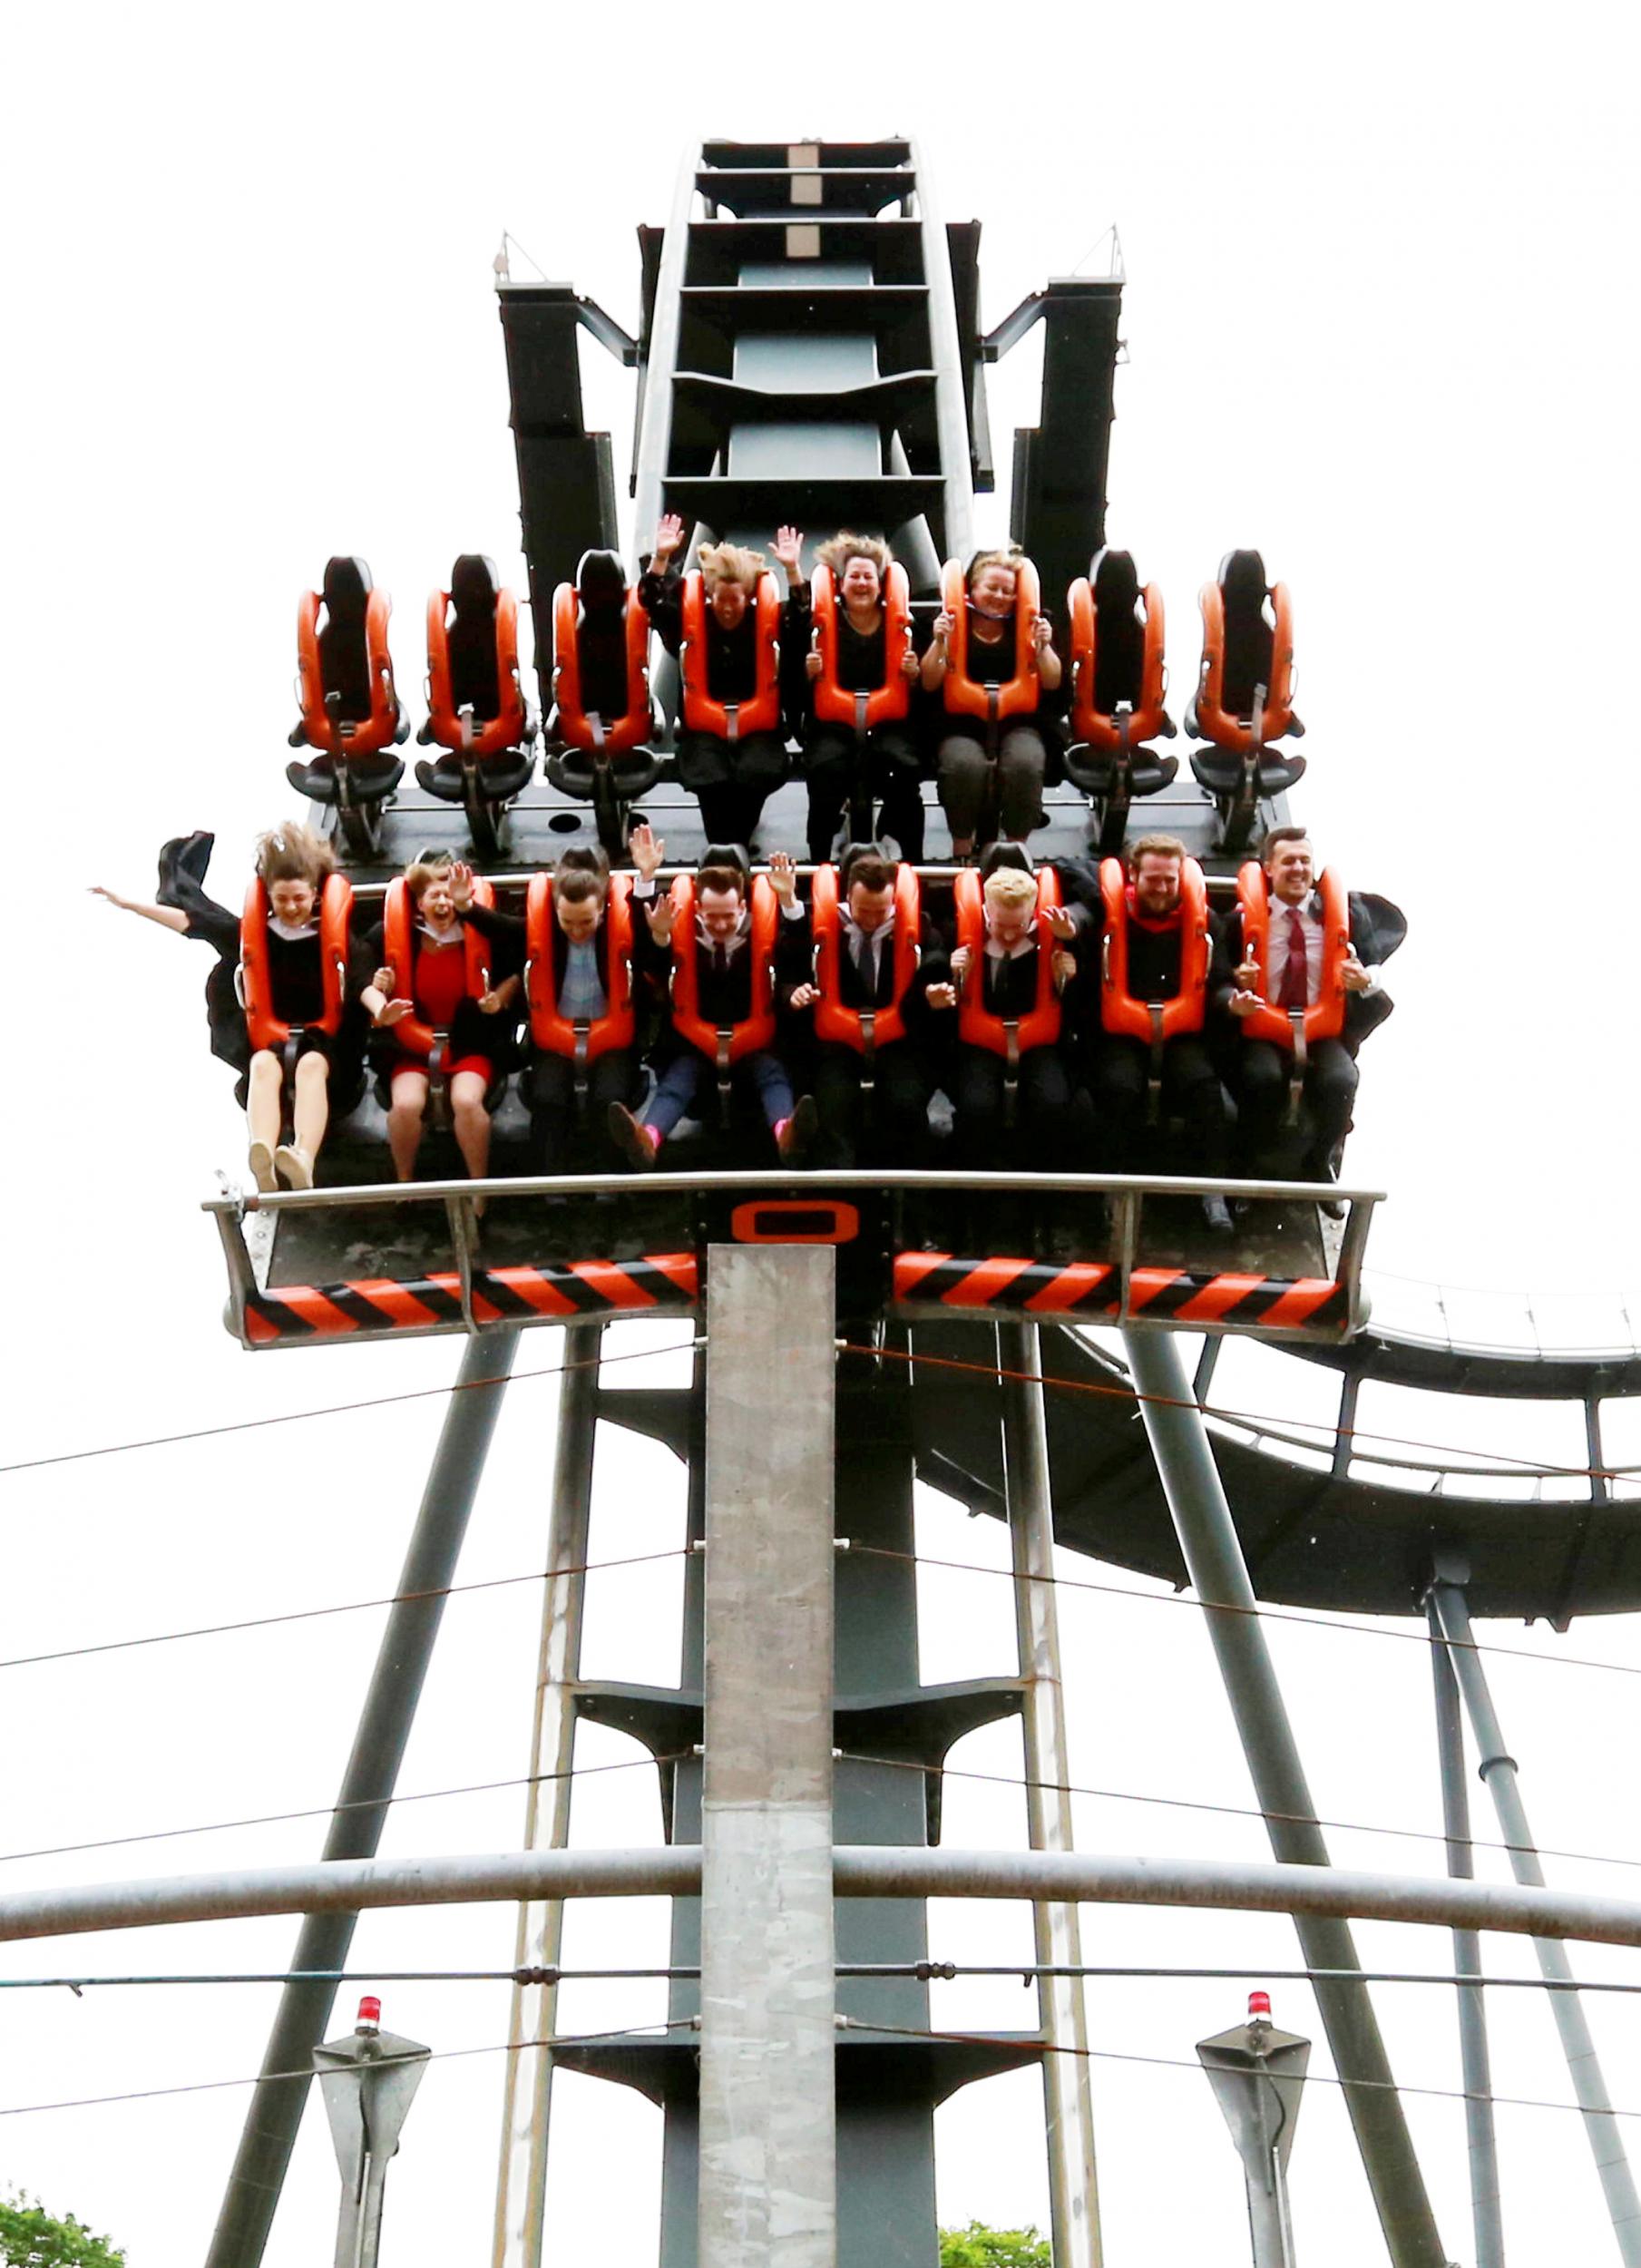 ‘Graduation ceremony on rollercoaster was ‘fitting way to end course’, says student